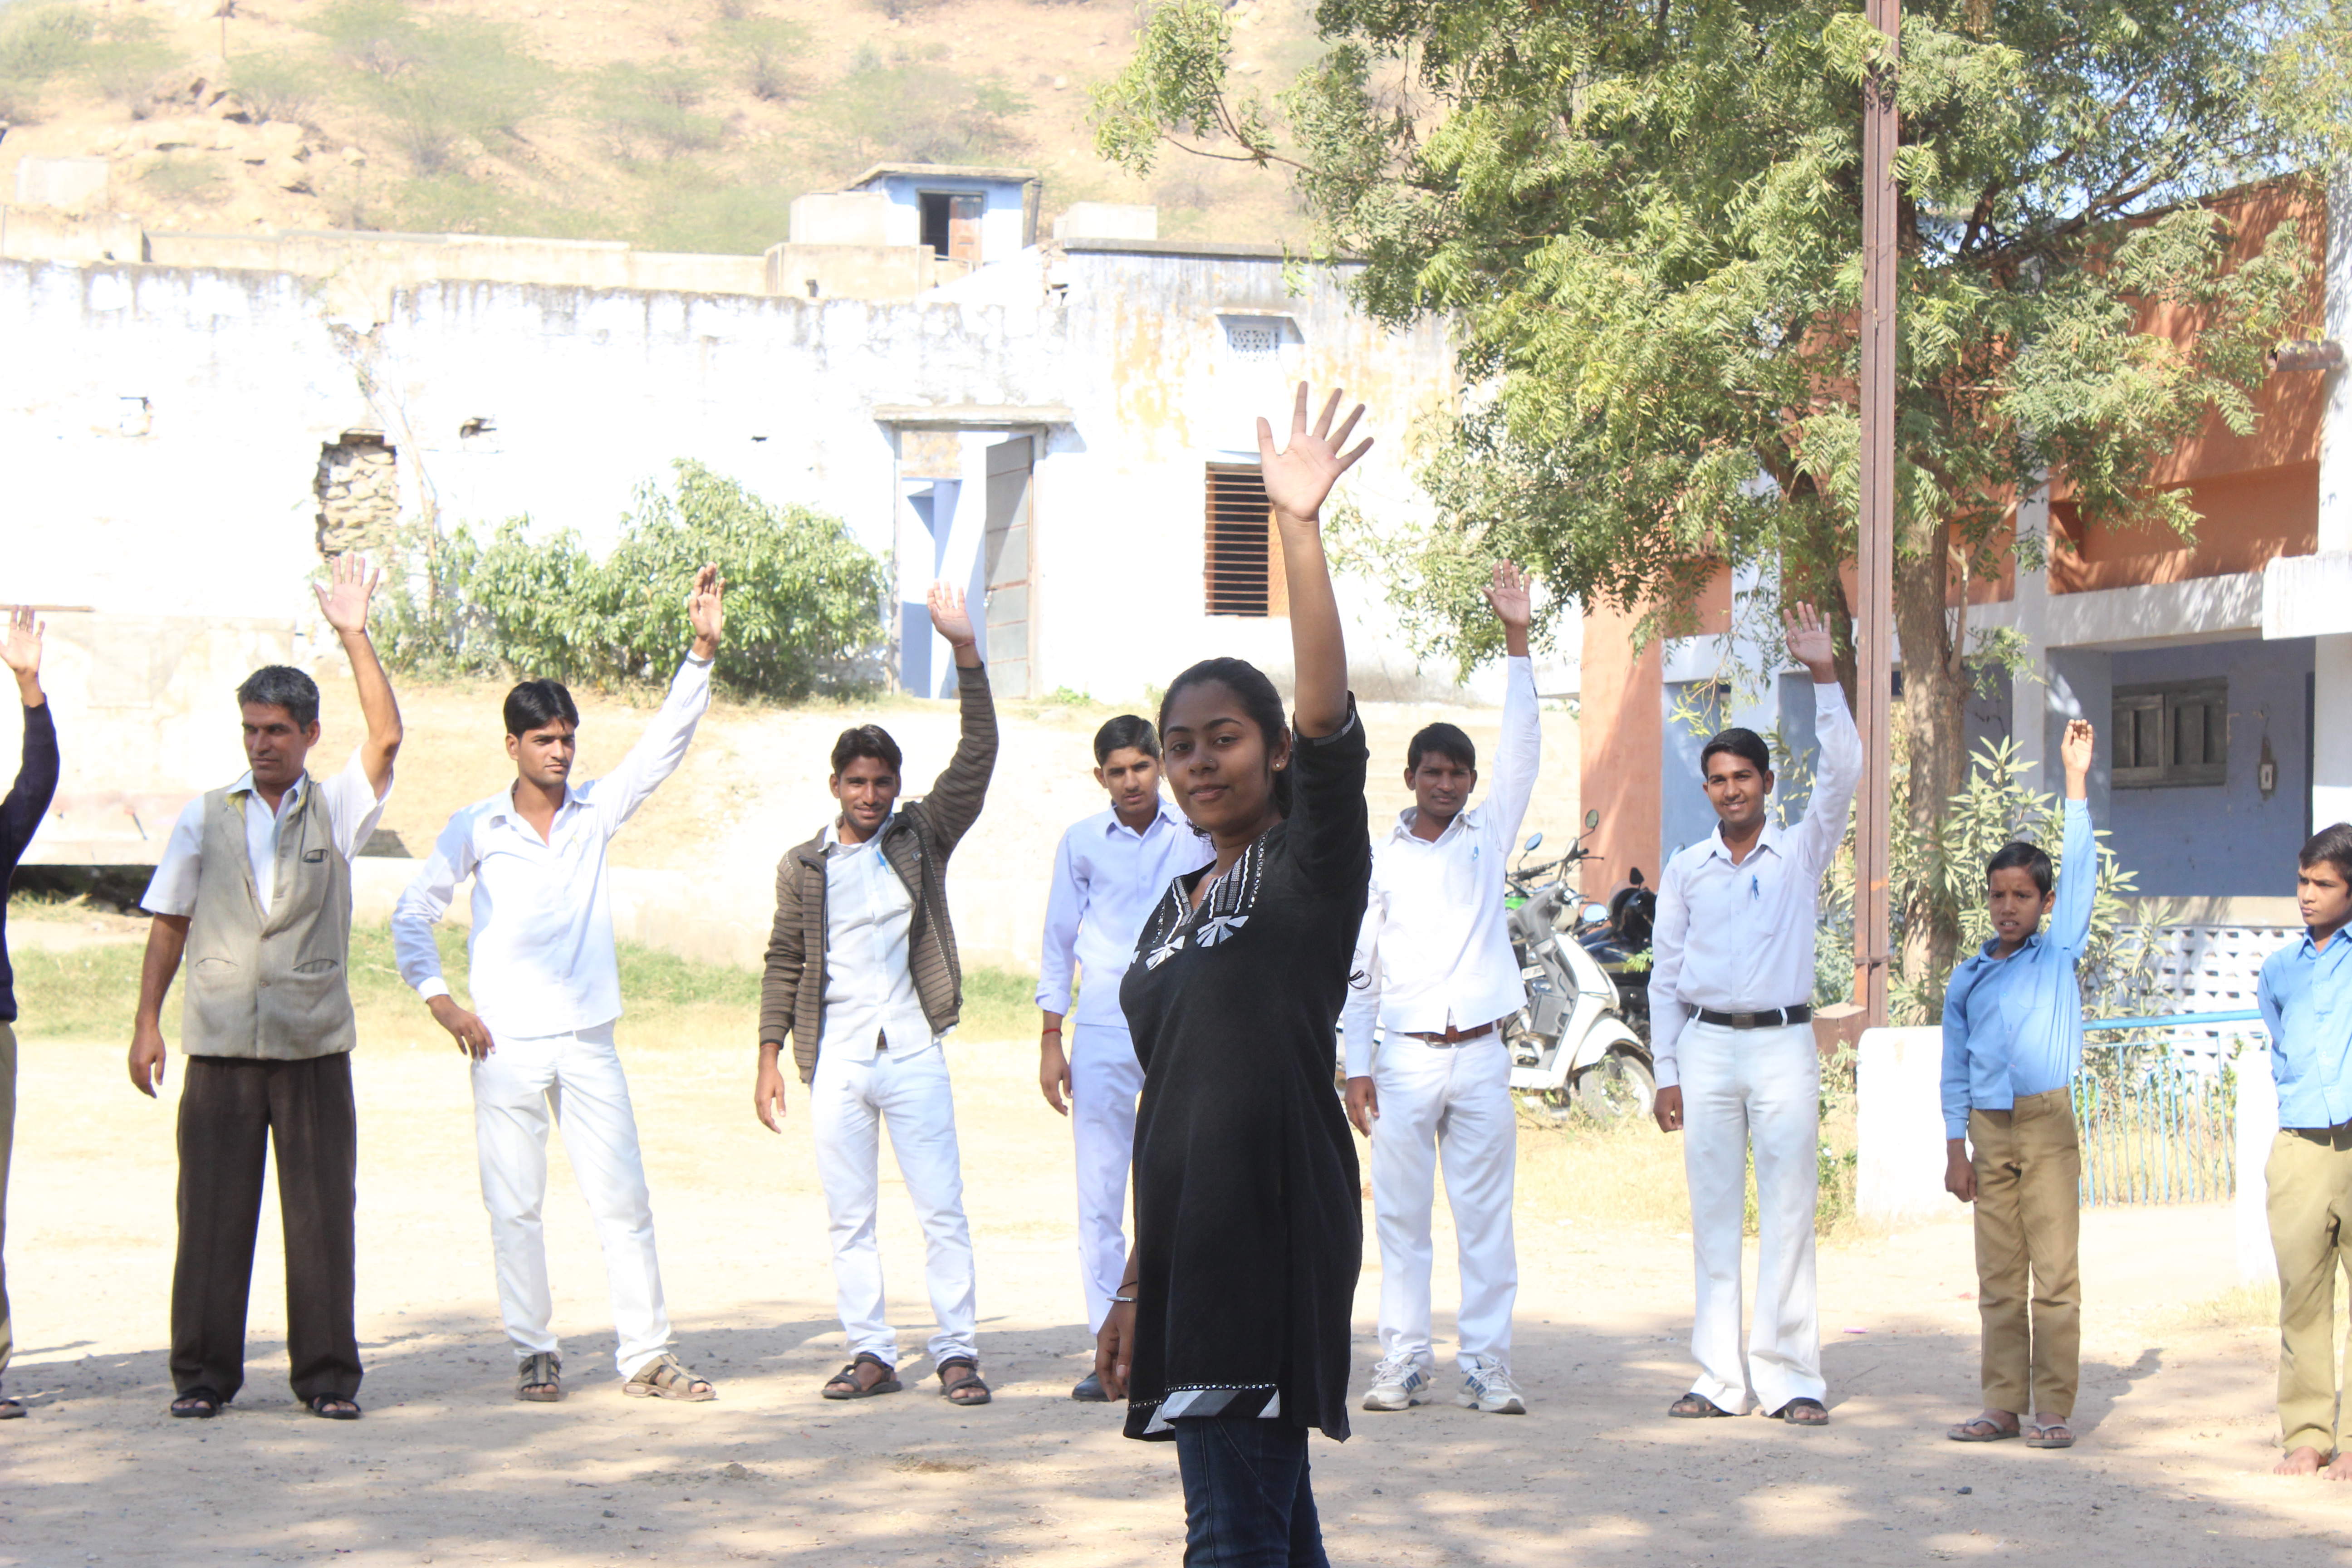 Gandhi Fellow Richa singing the boogie boogie song with kids